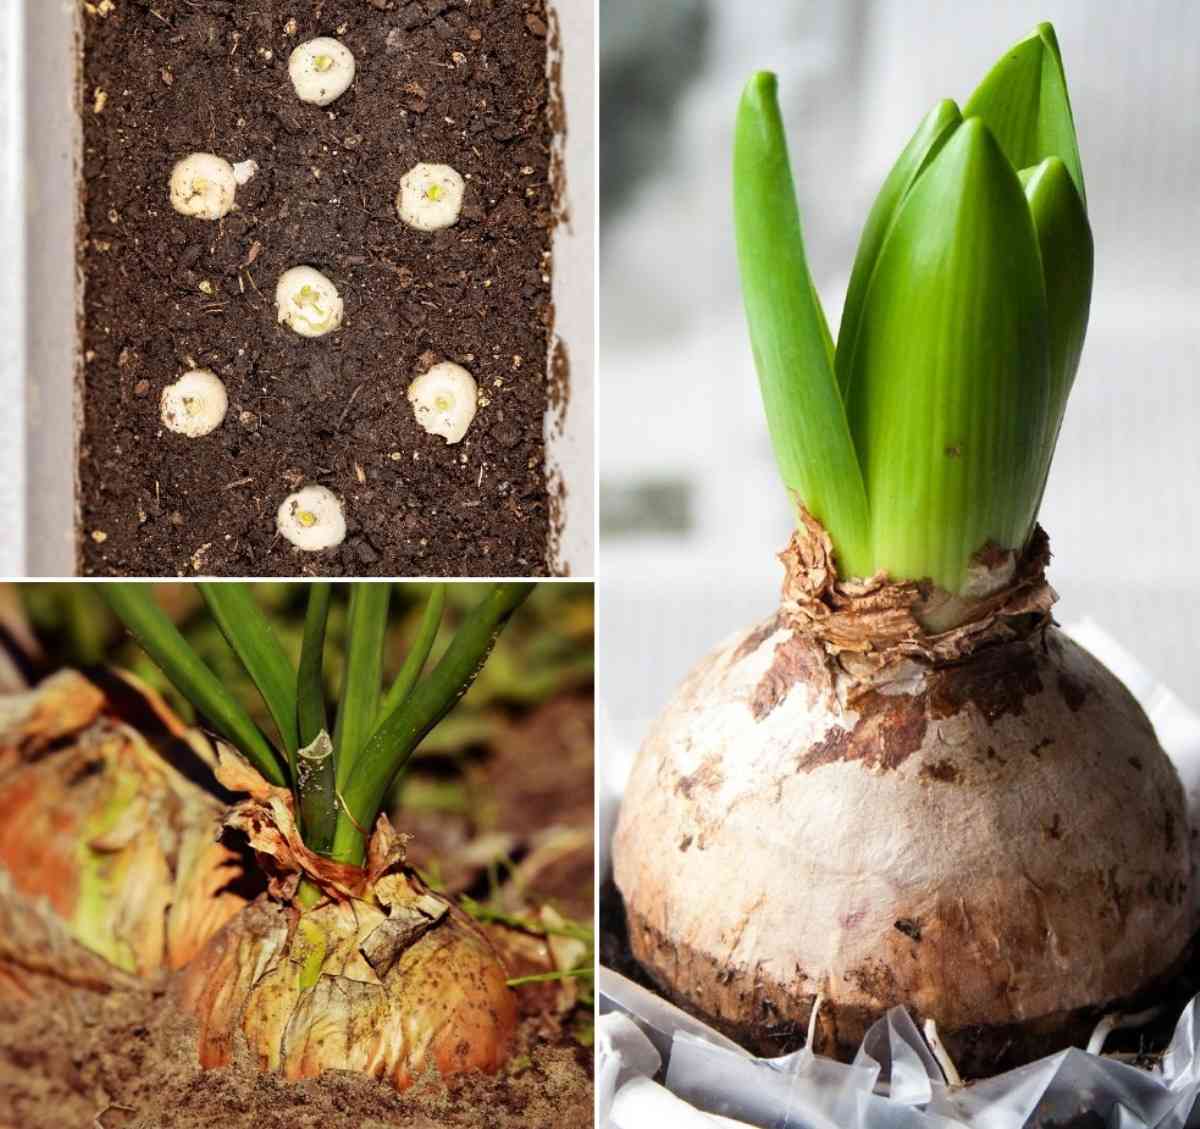 A guide to Growing Onions from Seed.